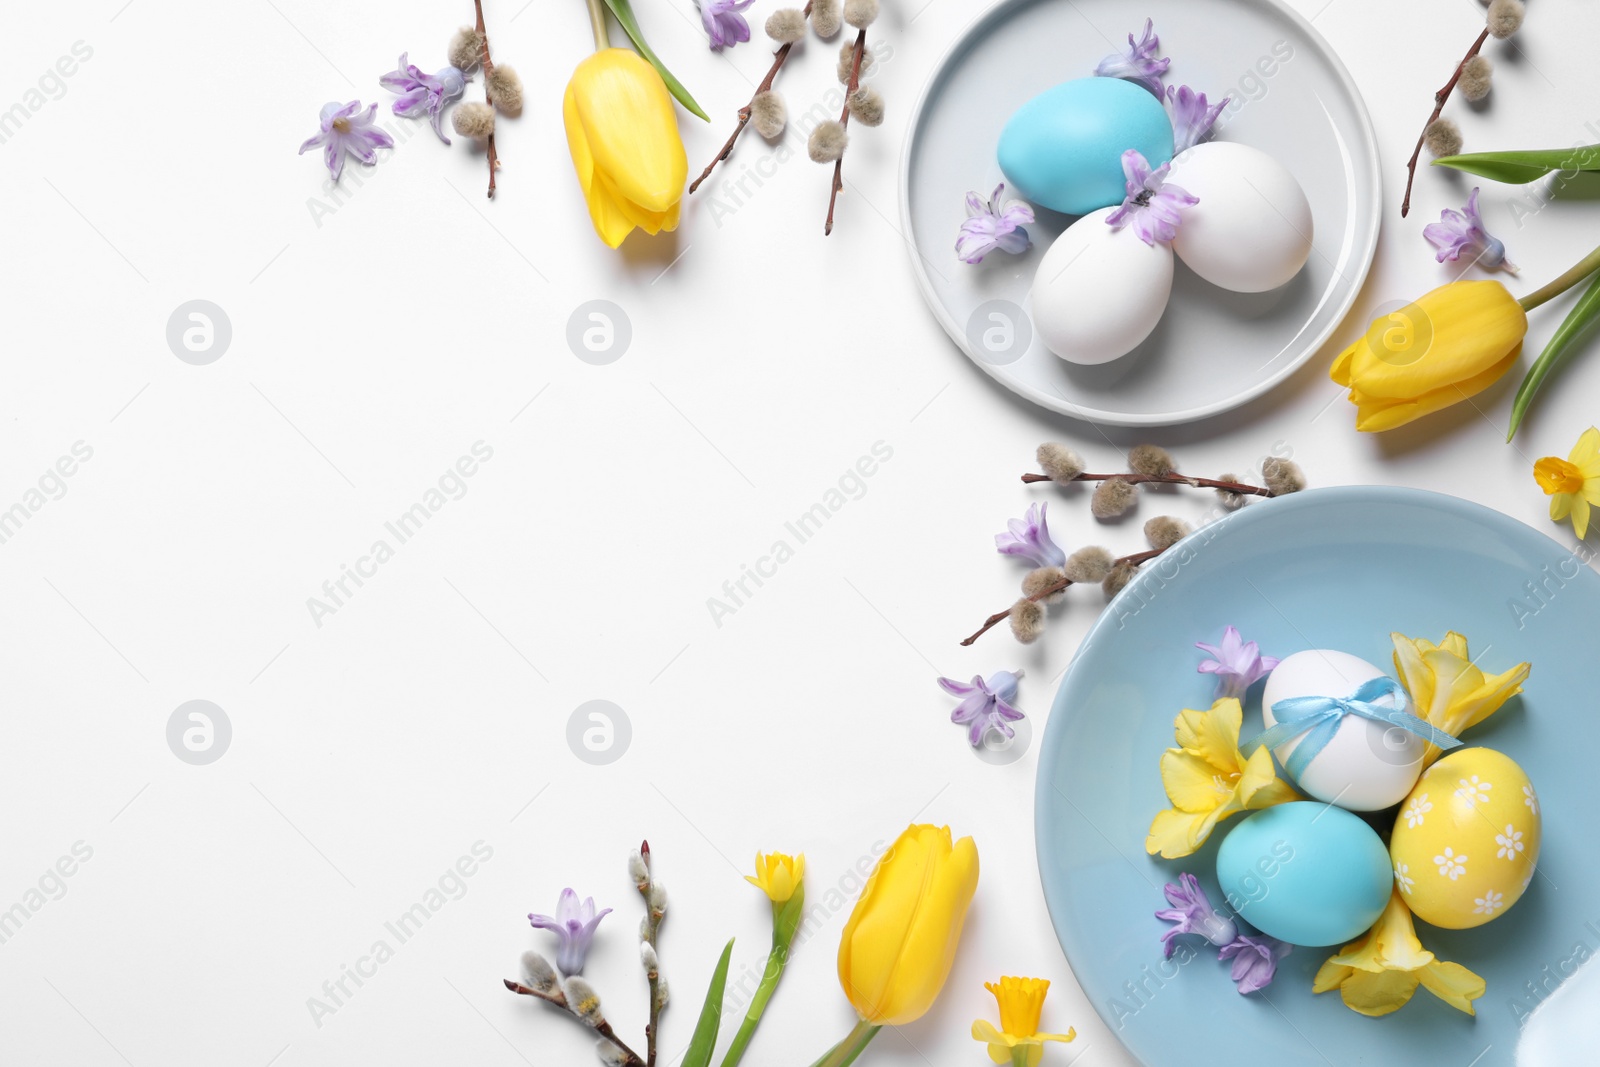 Photo of Festive Easter table setting with painted eggs and floral decor on white background, flat lay. Space for text